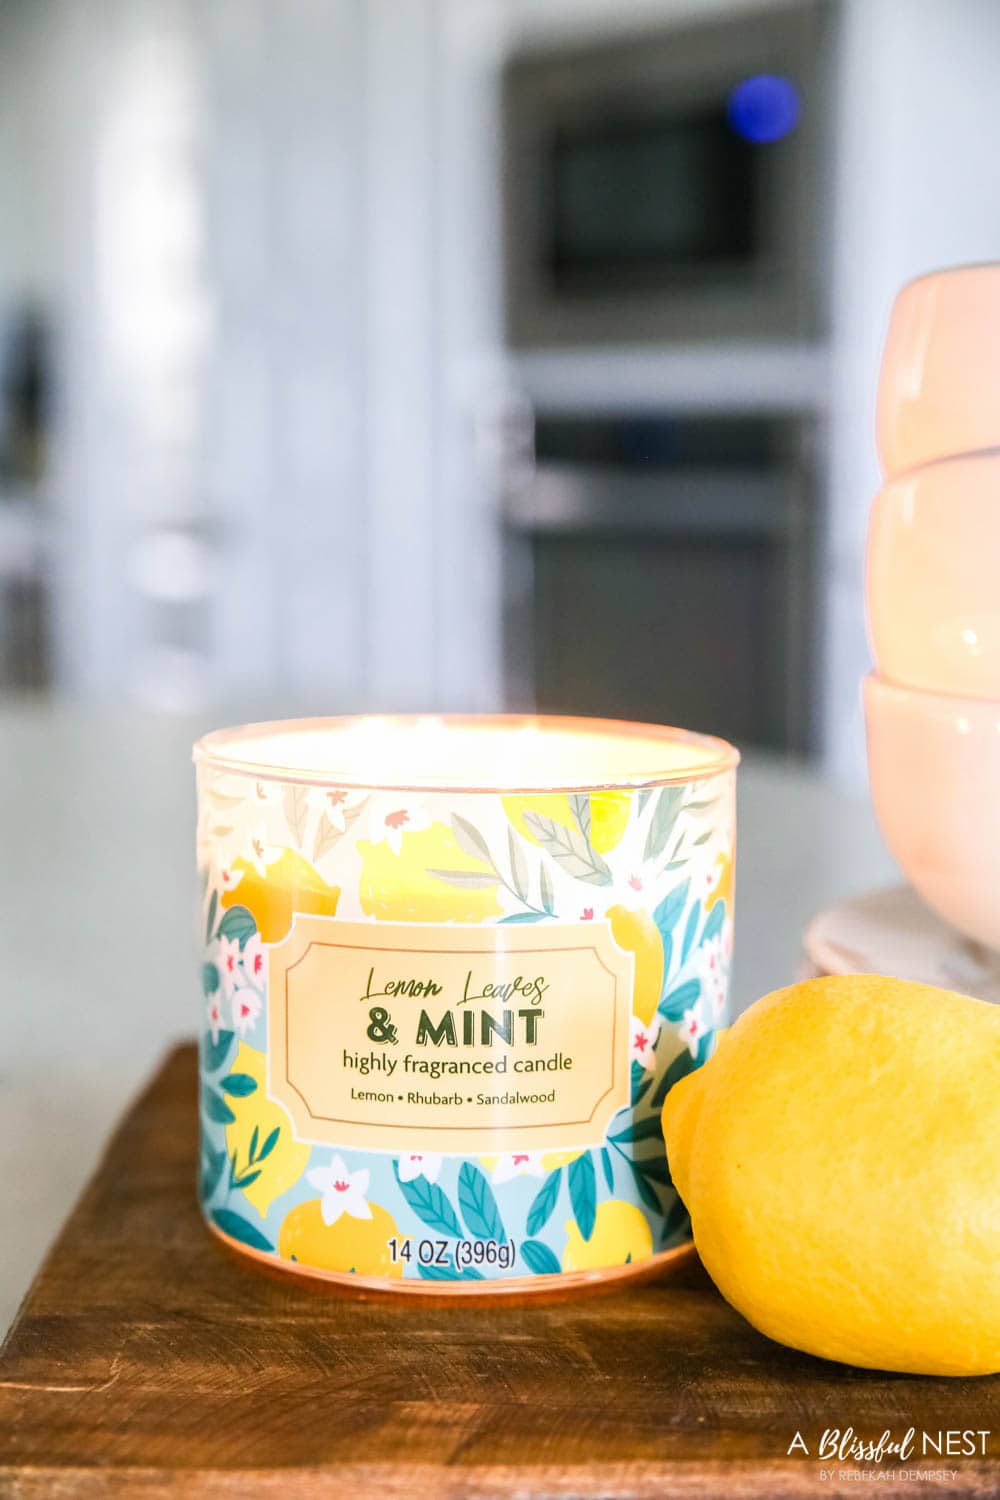 The yummiest smelling candle for your kitchen. #ABlissfulNest #lemon 